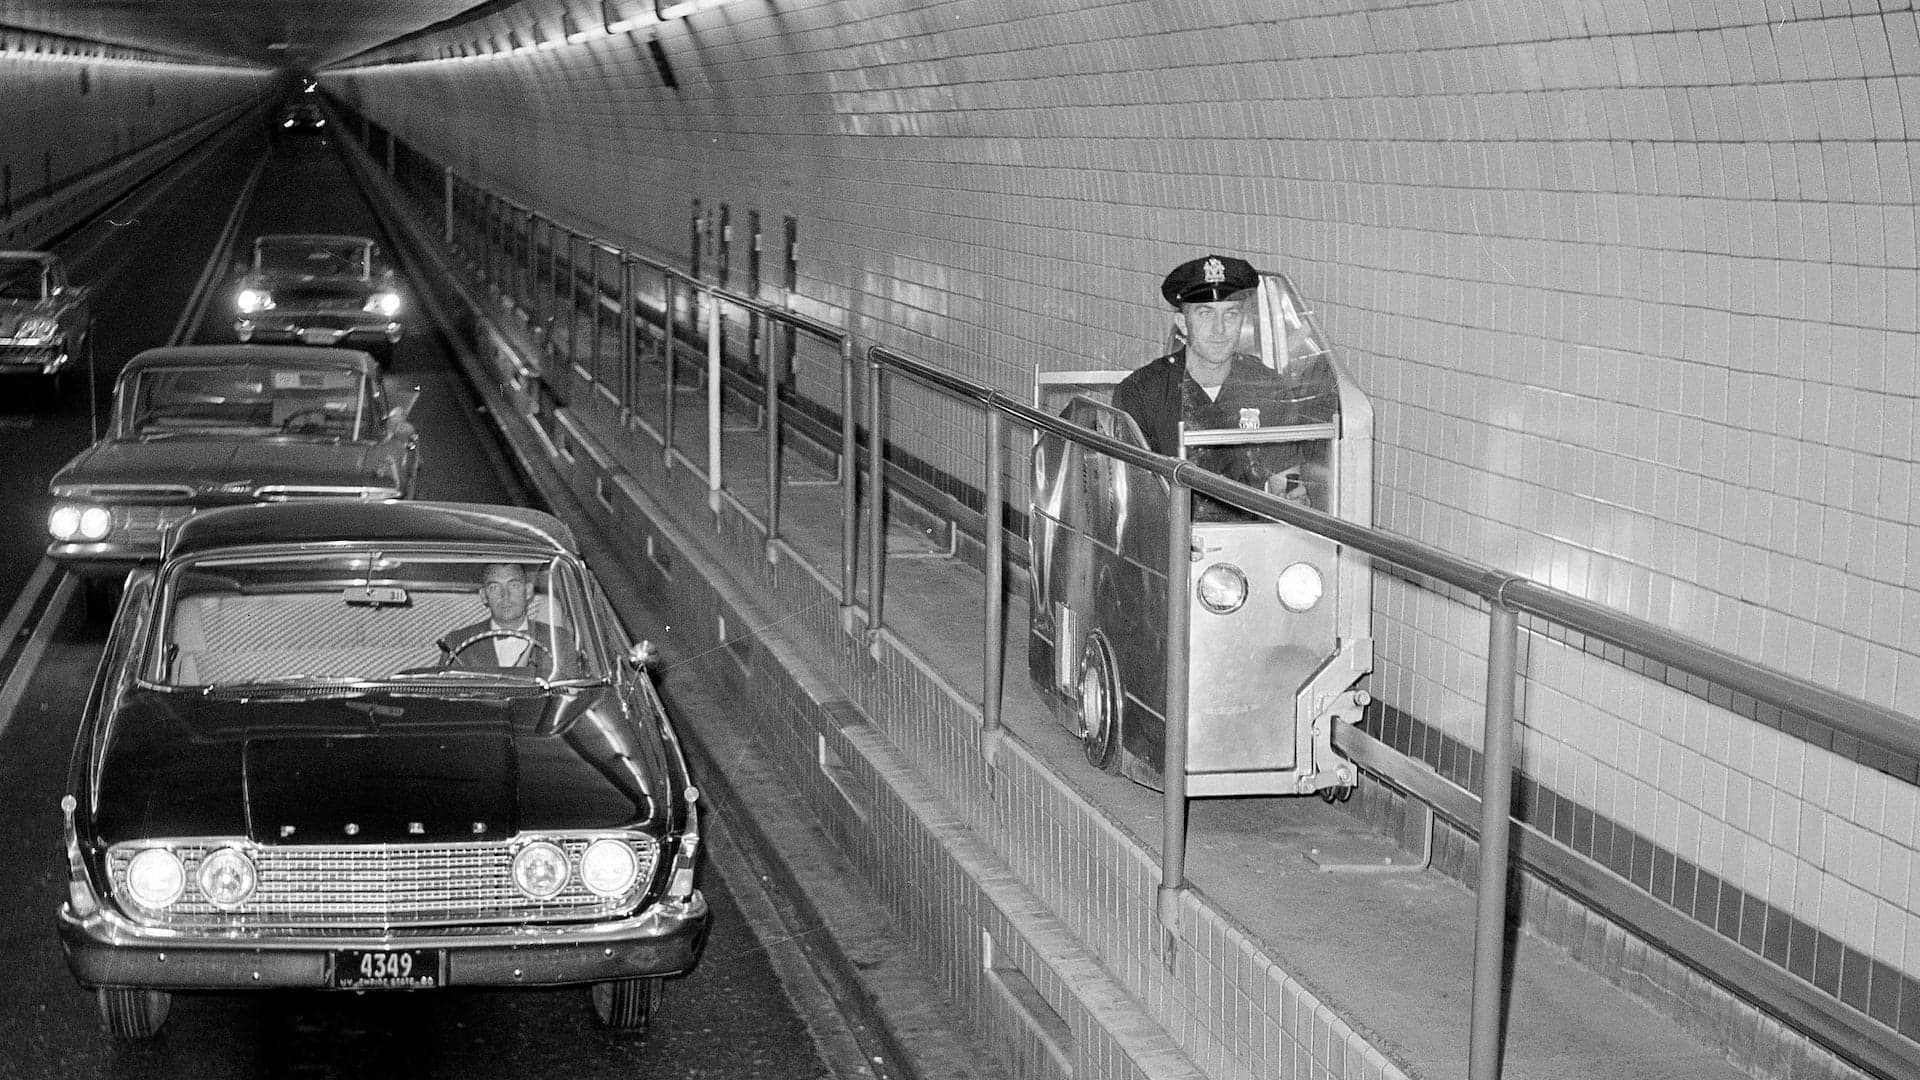 New York Police Used These Tiny ‘Catwalk Cars’ to Patrol the City’s Tunnels